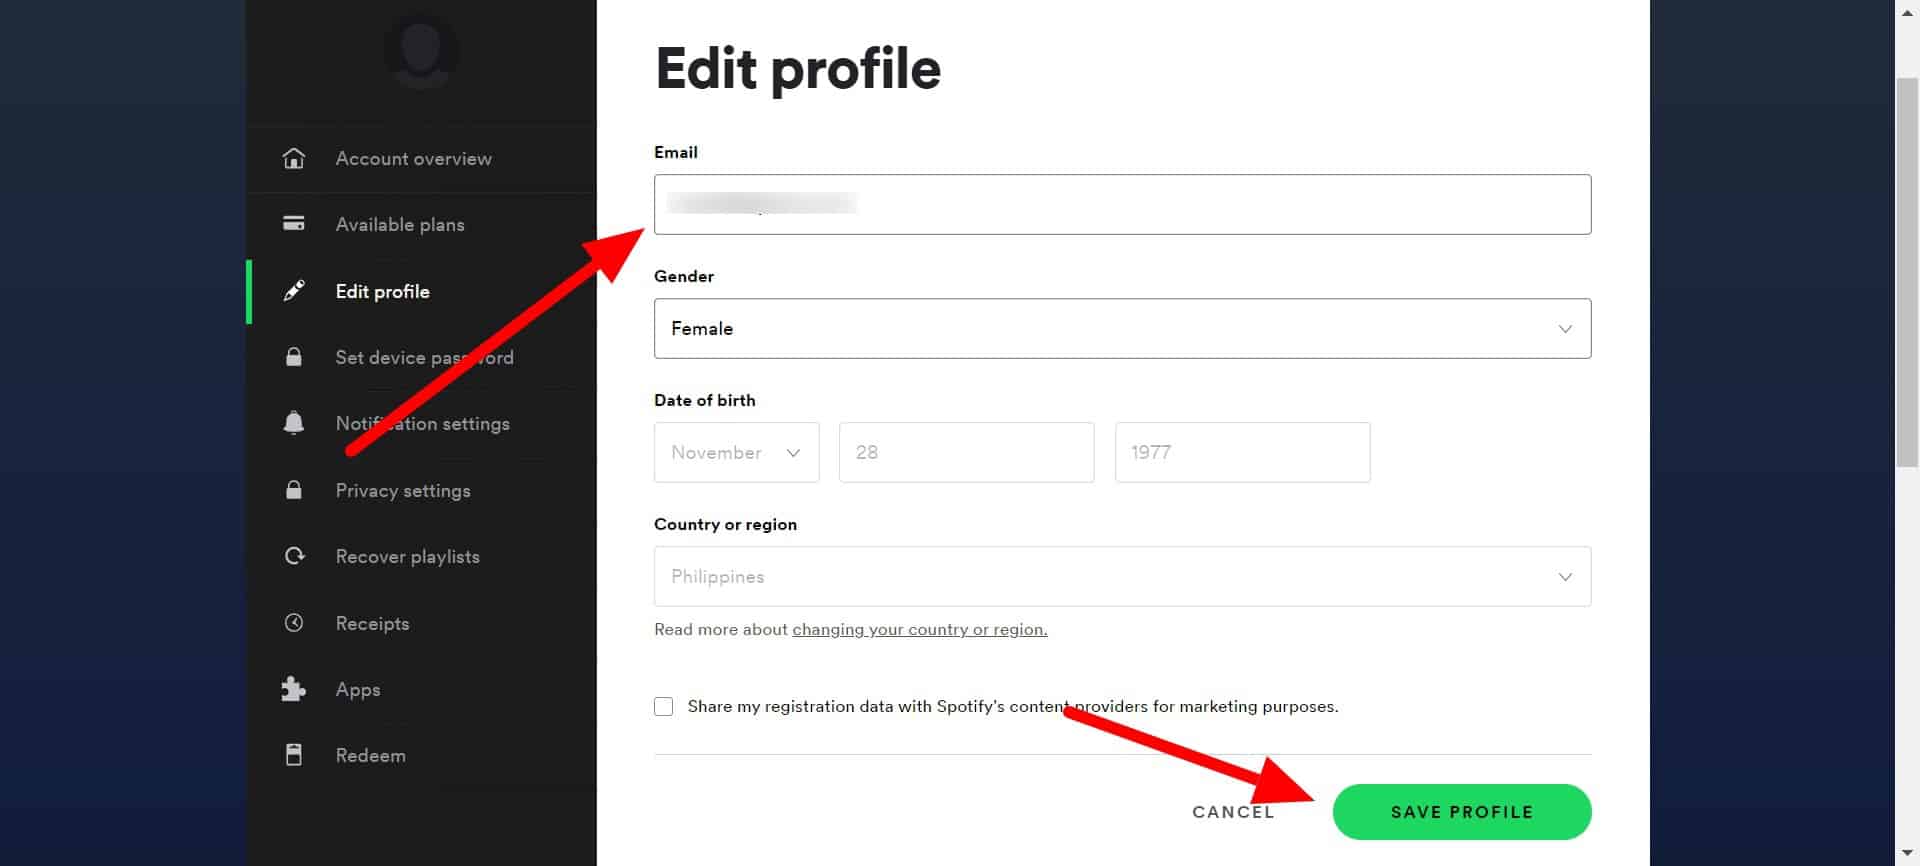 How to Change the Email on Your Spotify Account